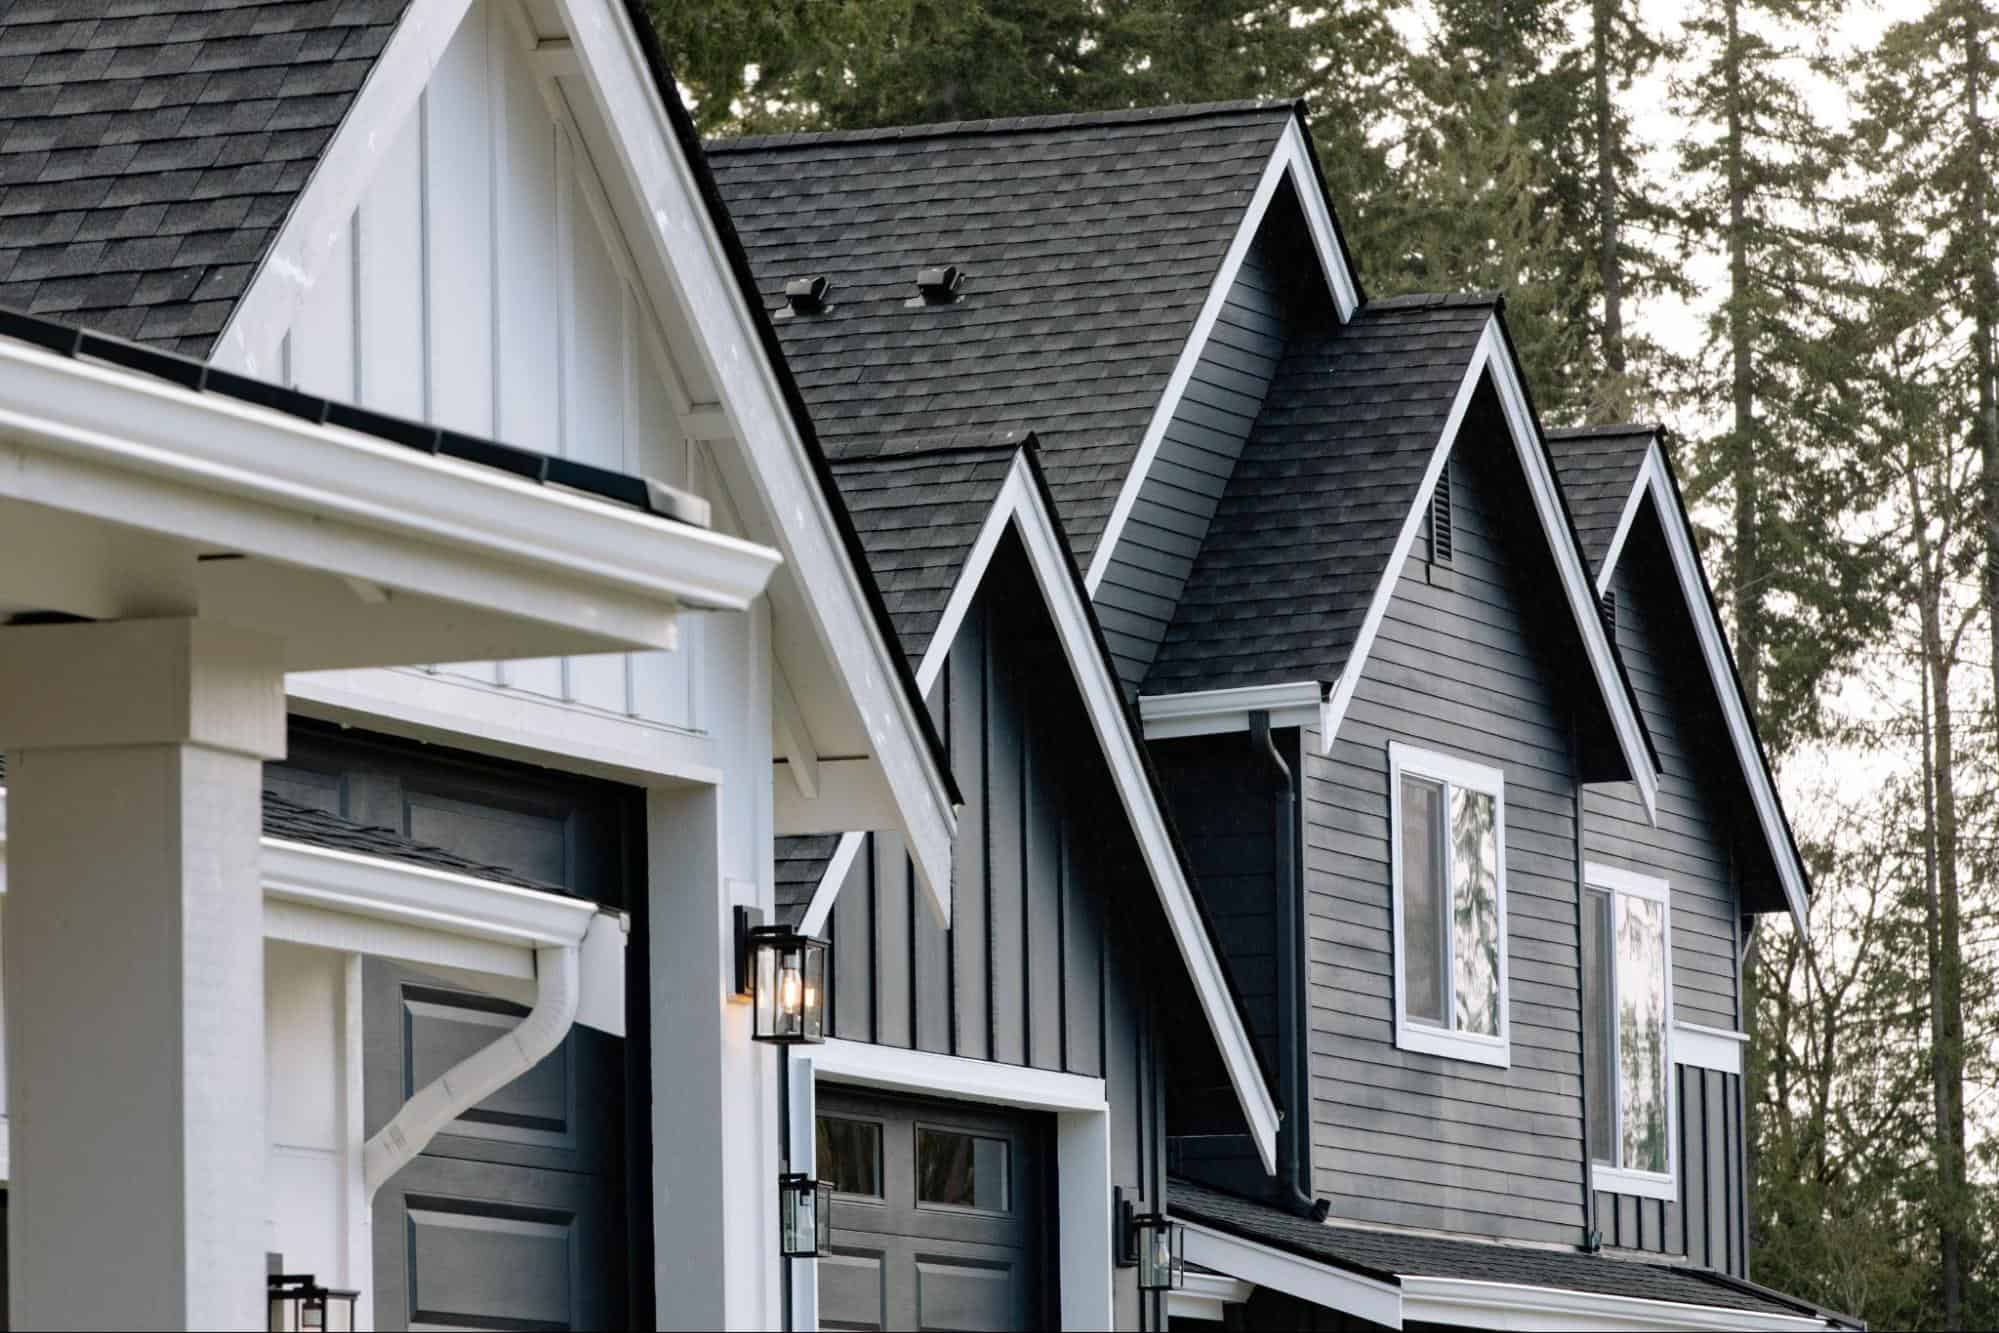 Multiple gabled roofline, featuring various exterior millwork trim styles